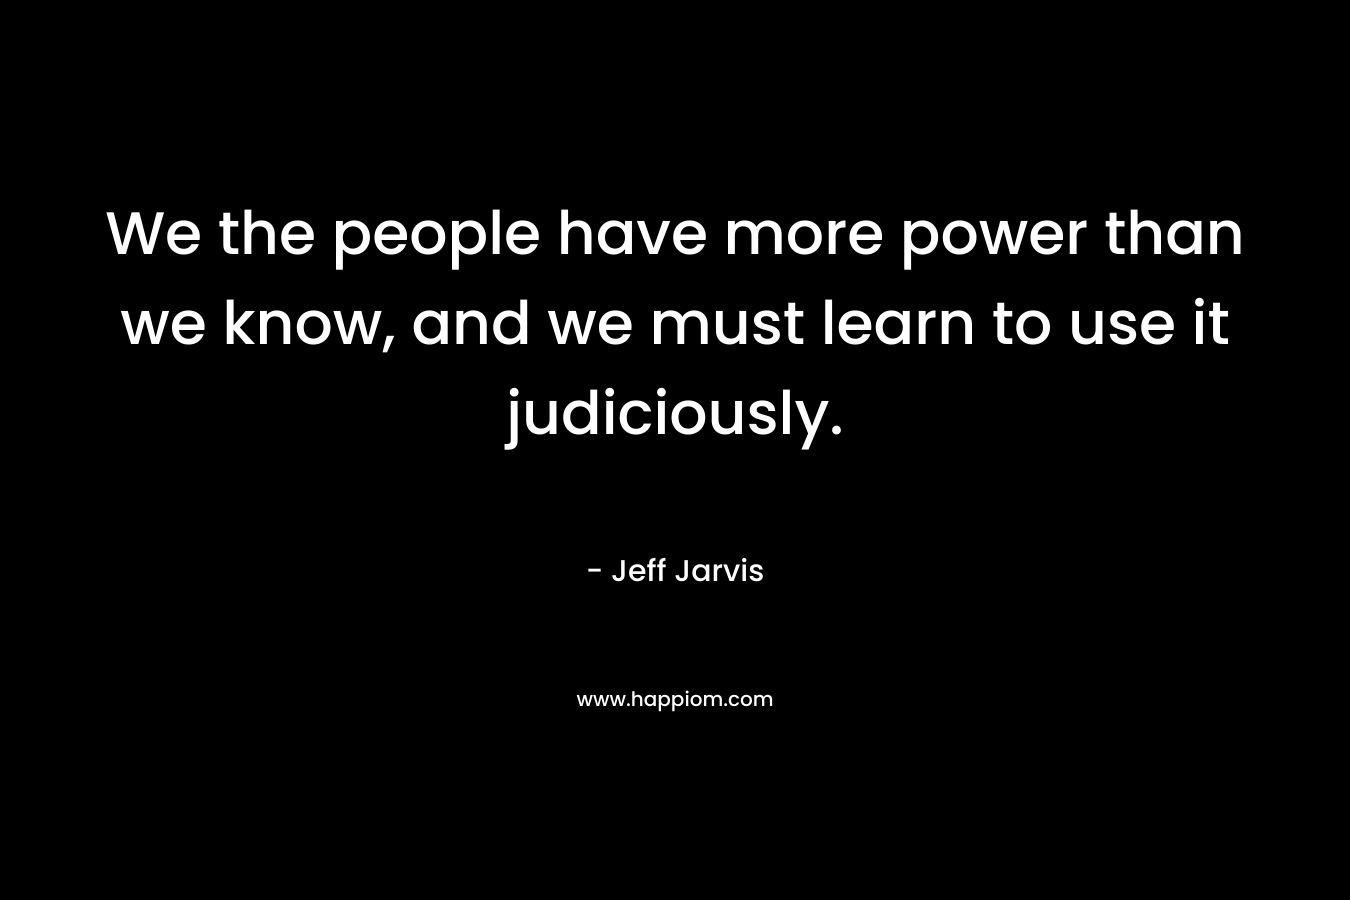 We the people have more power than we know, and we must learn to use it judiciously. – Jeff Jarvis